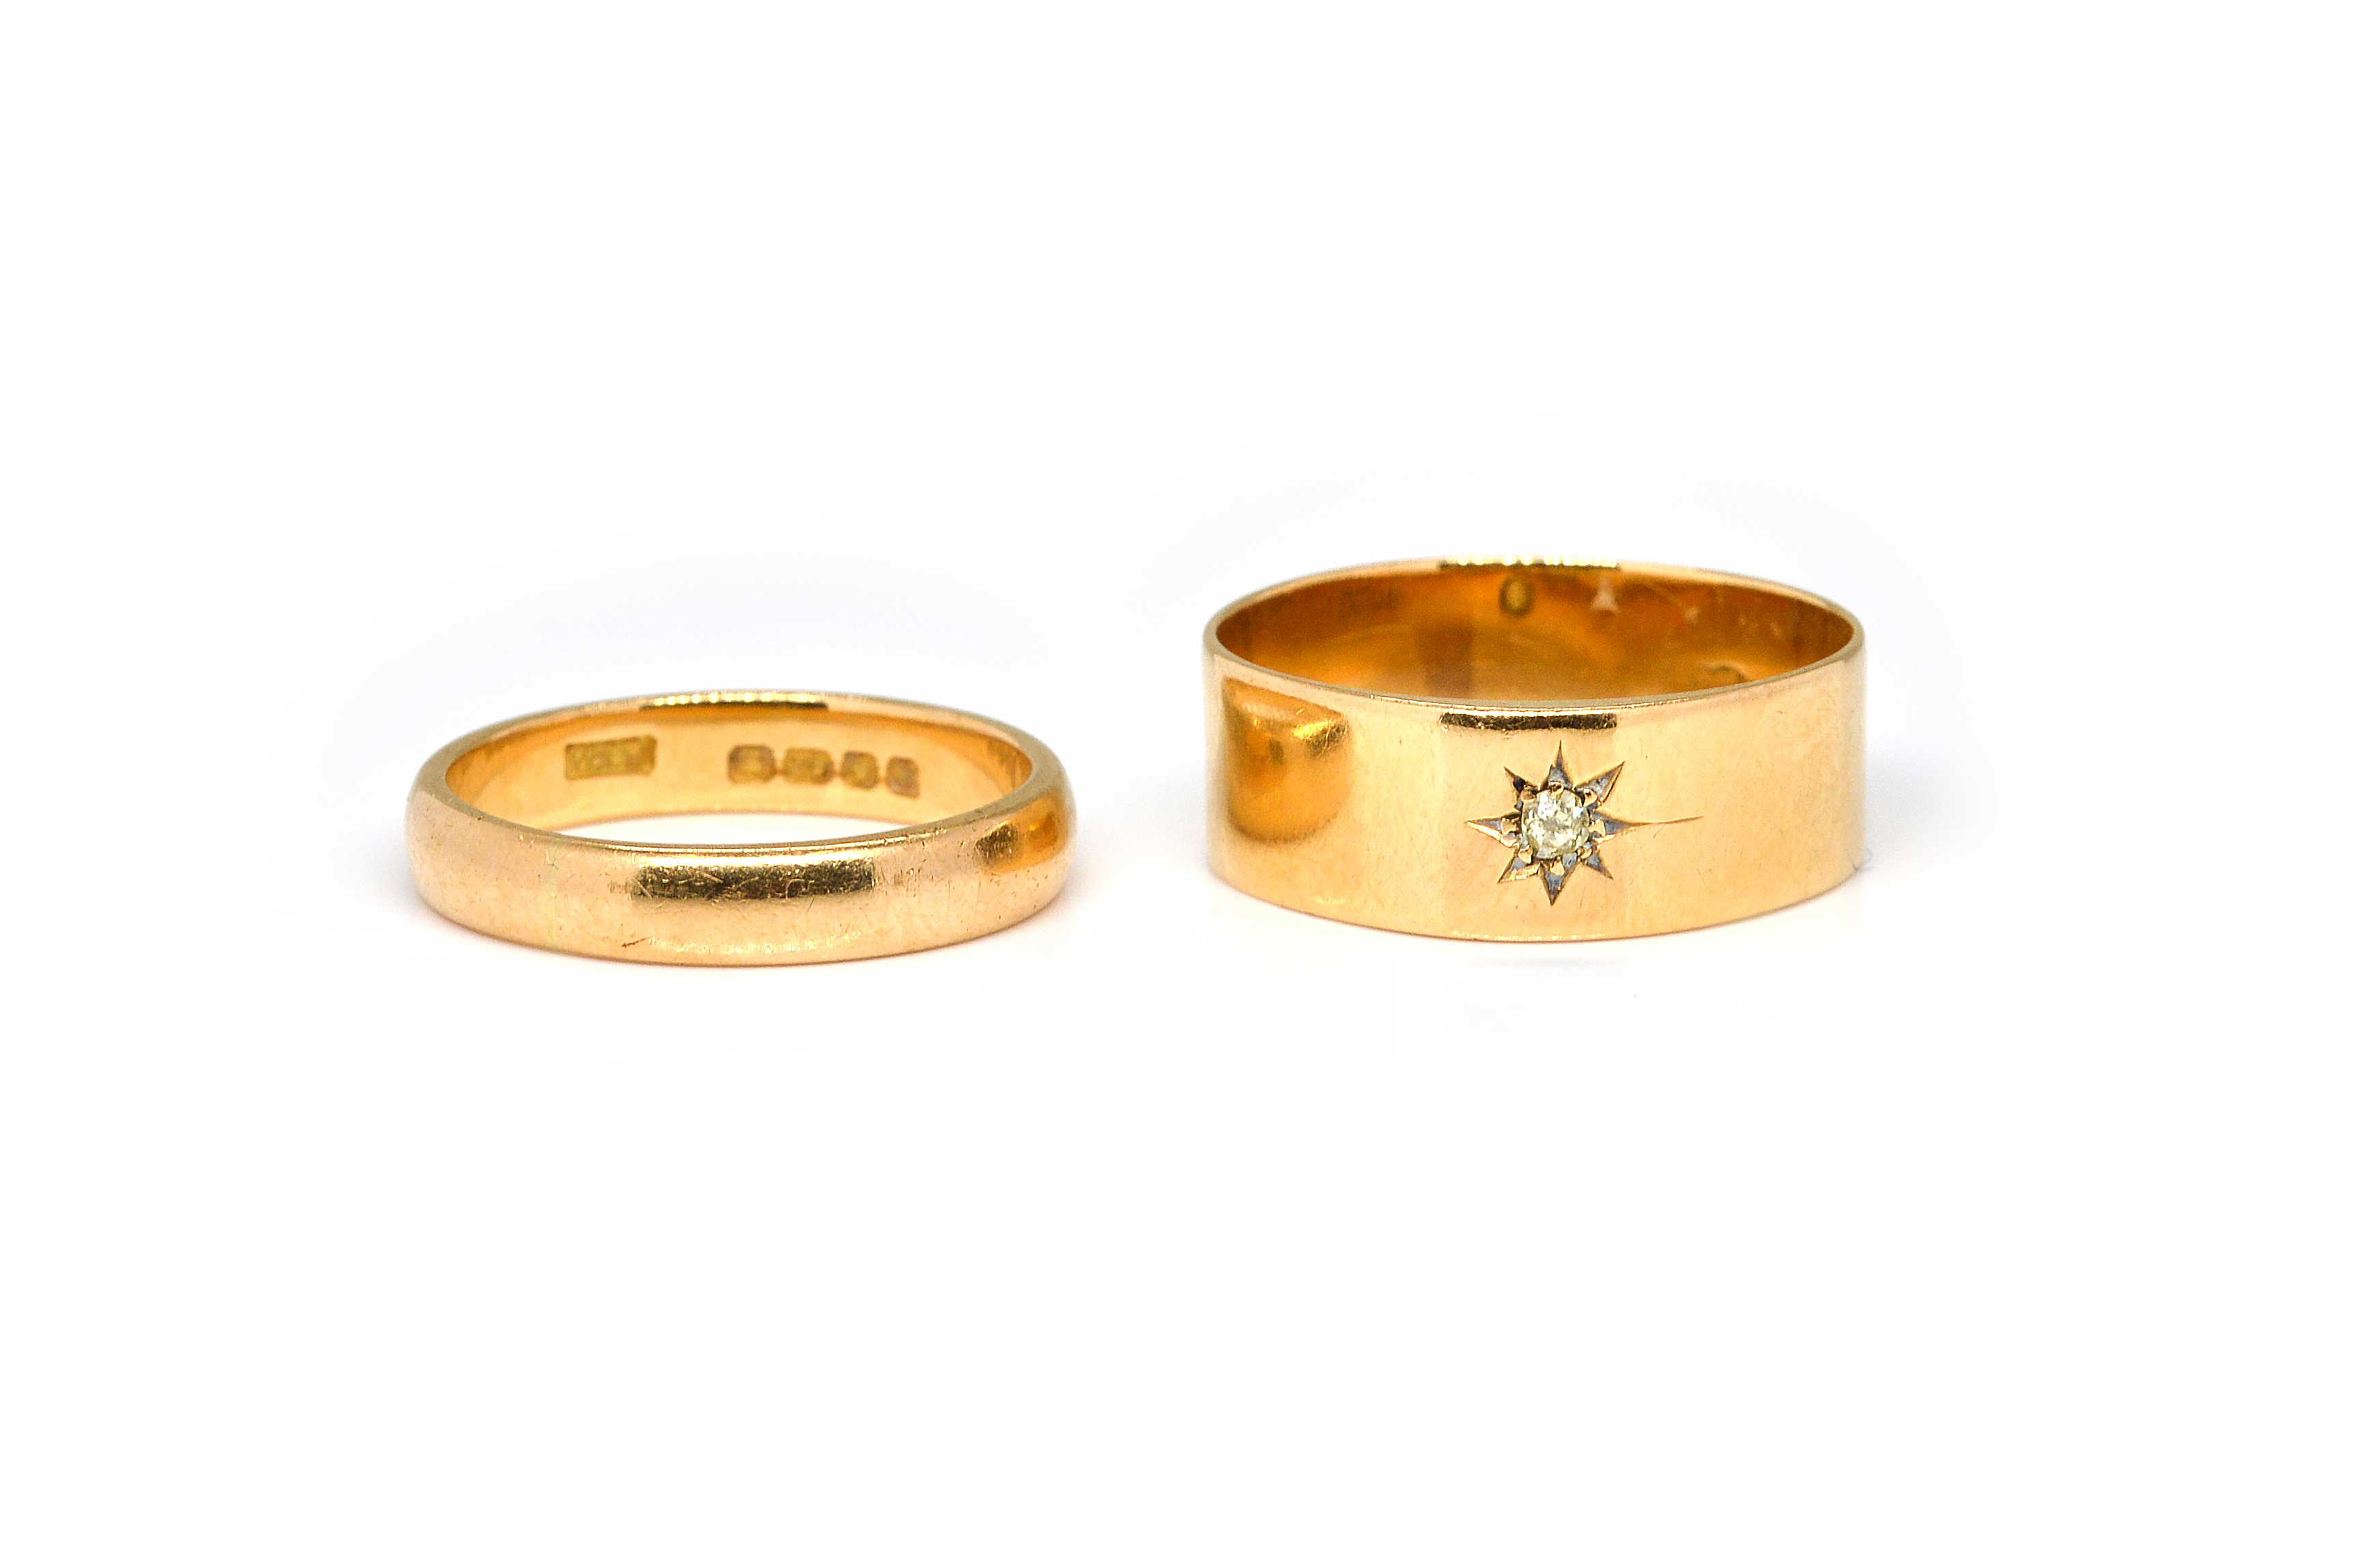 A DIAMOND GYPSY RING AND A GOLD